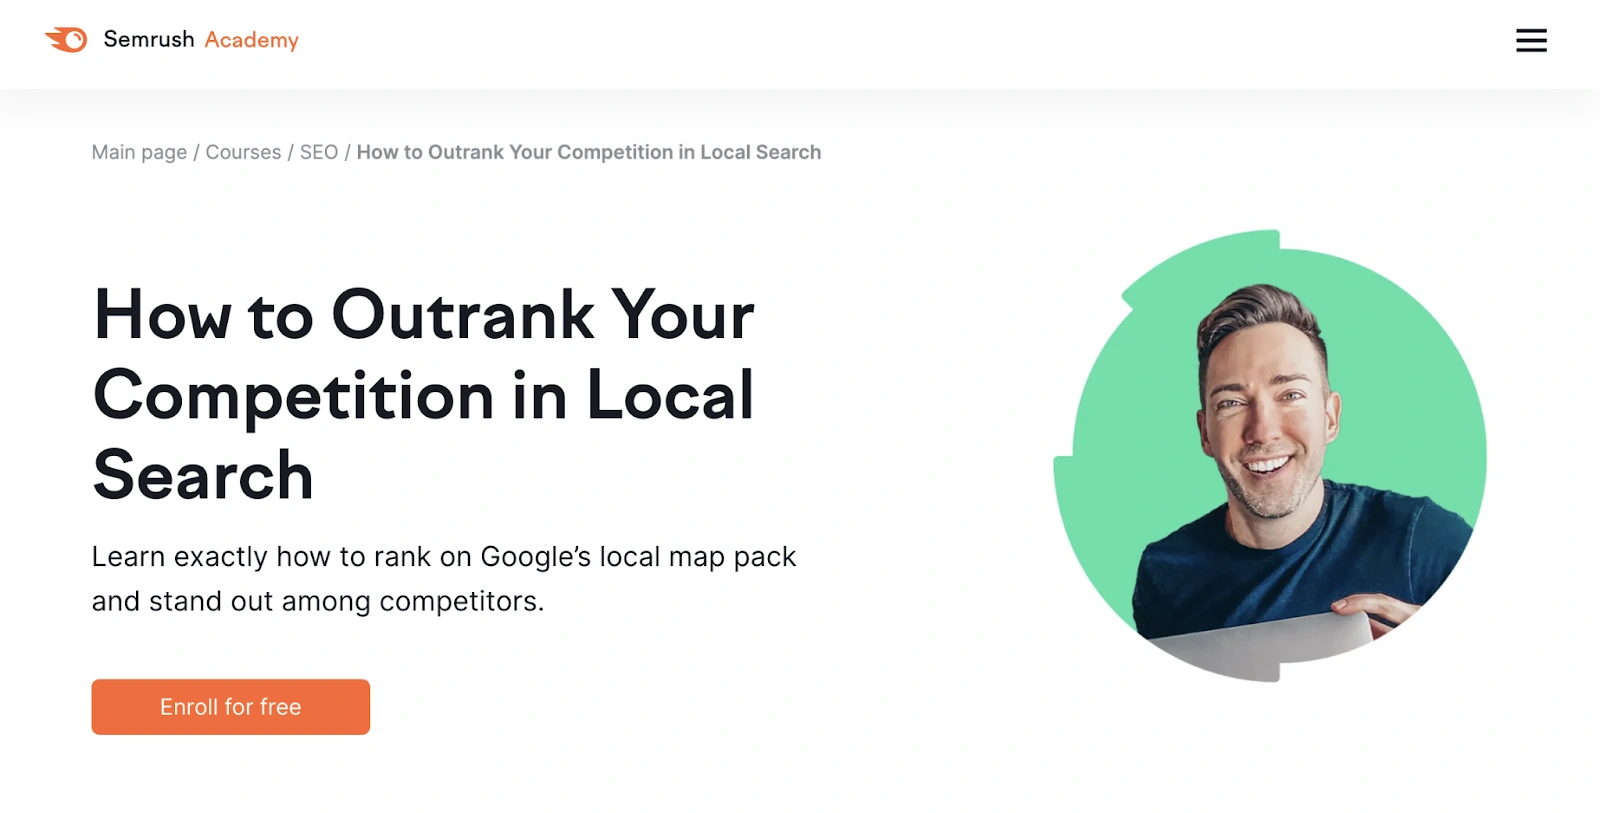 How to Outrank Your Competition in Local Search dari SEMrush Academy